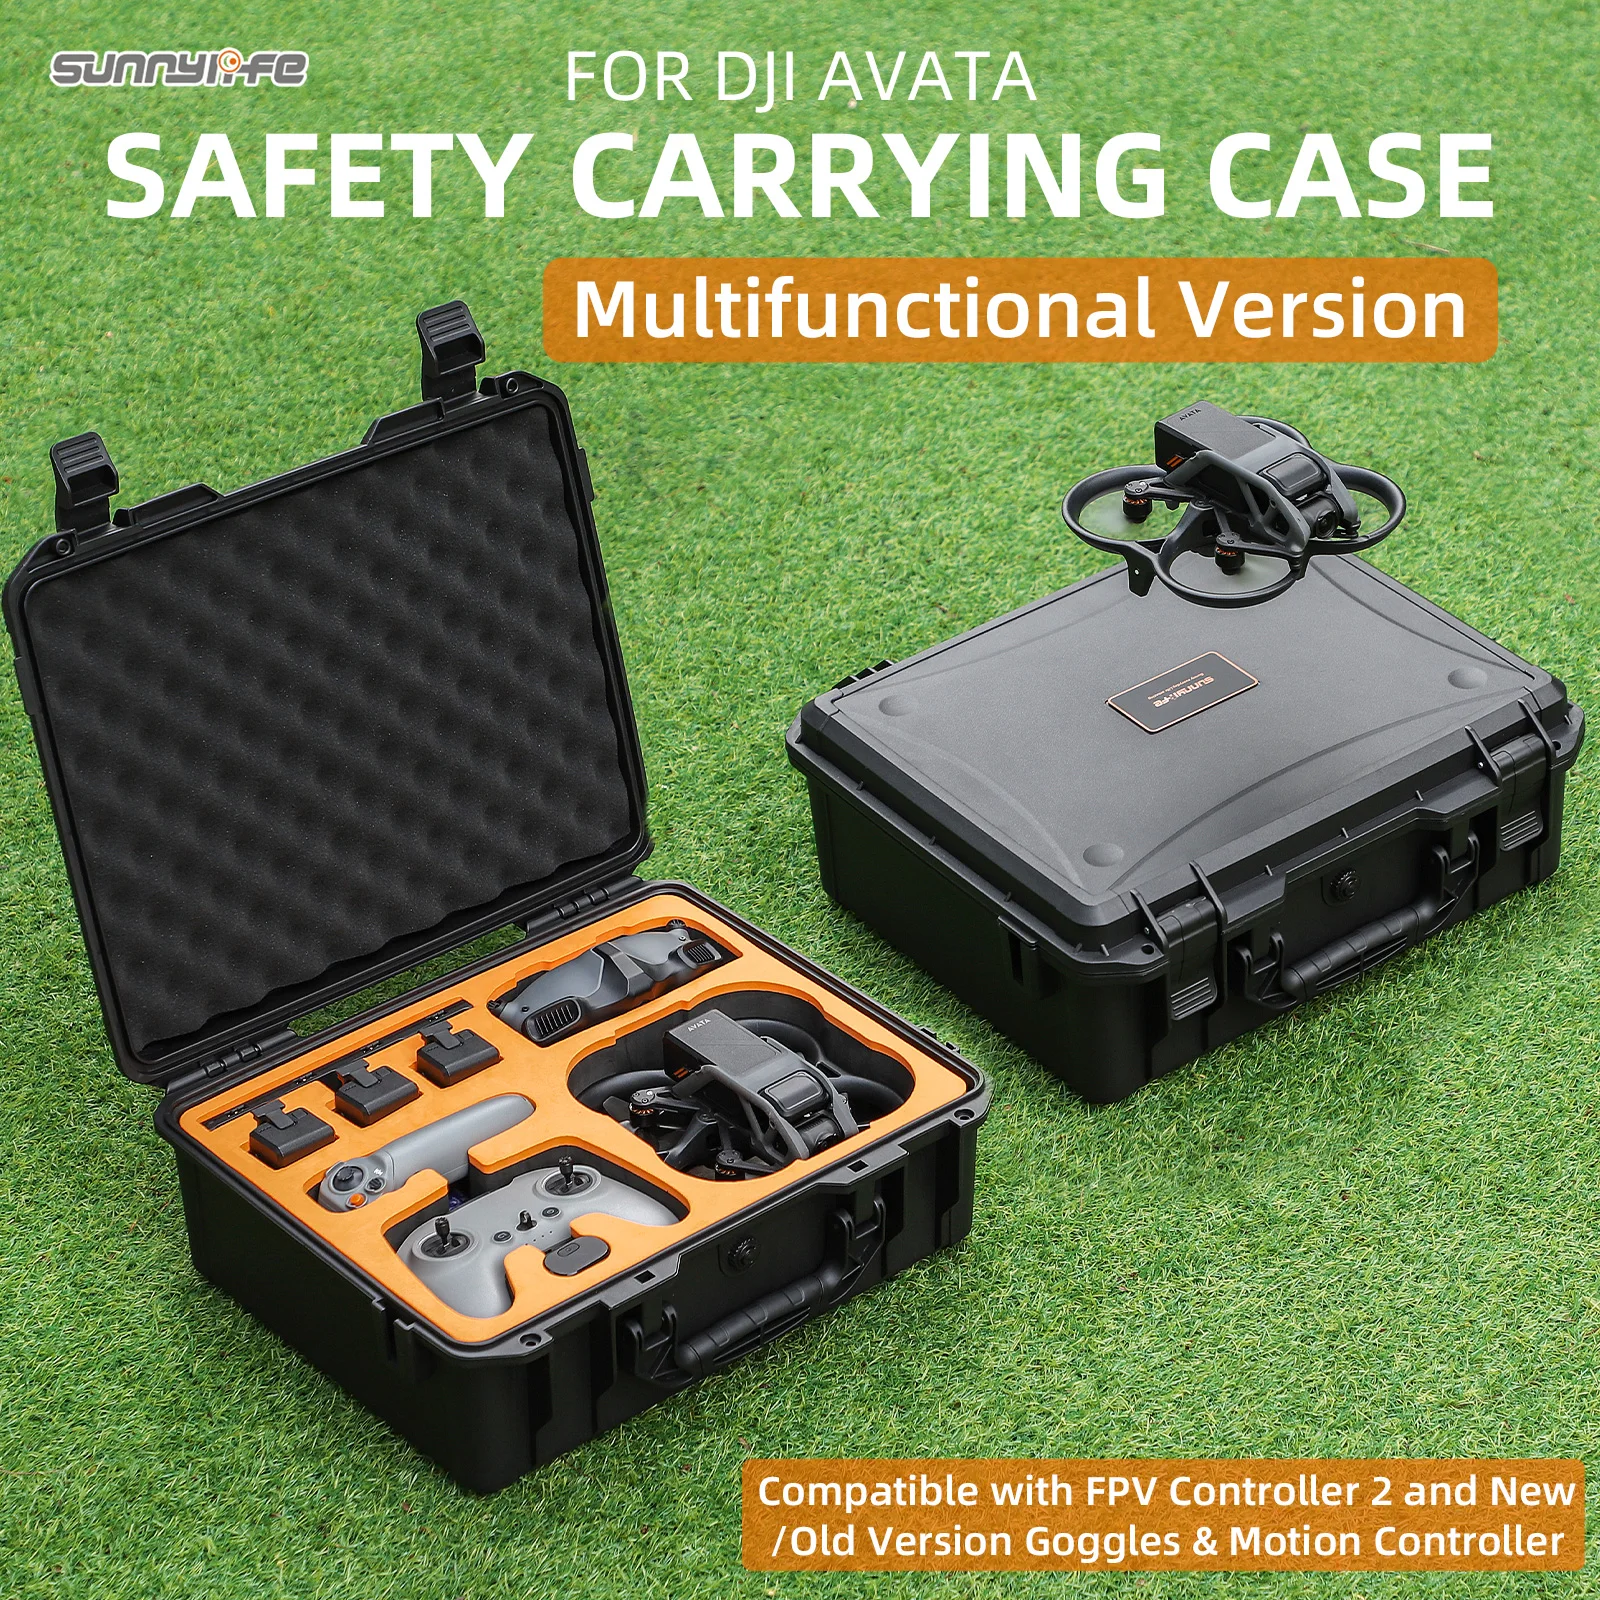 

Sunnylife Safety Carrying Case Large Capacity Waterproof Shock-proof Hard Case Goggles Integra for DJI Avata Explorer/ Pro-View